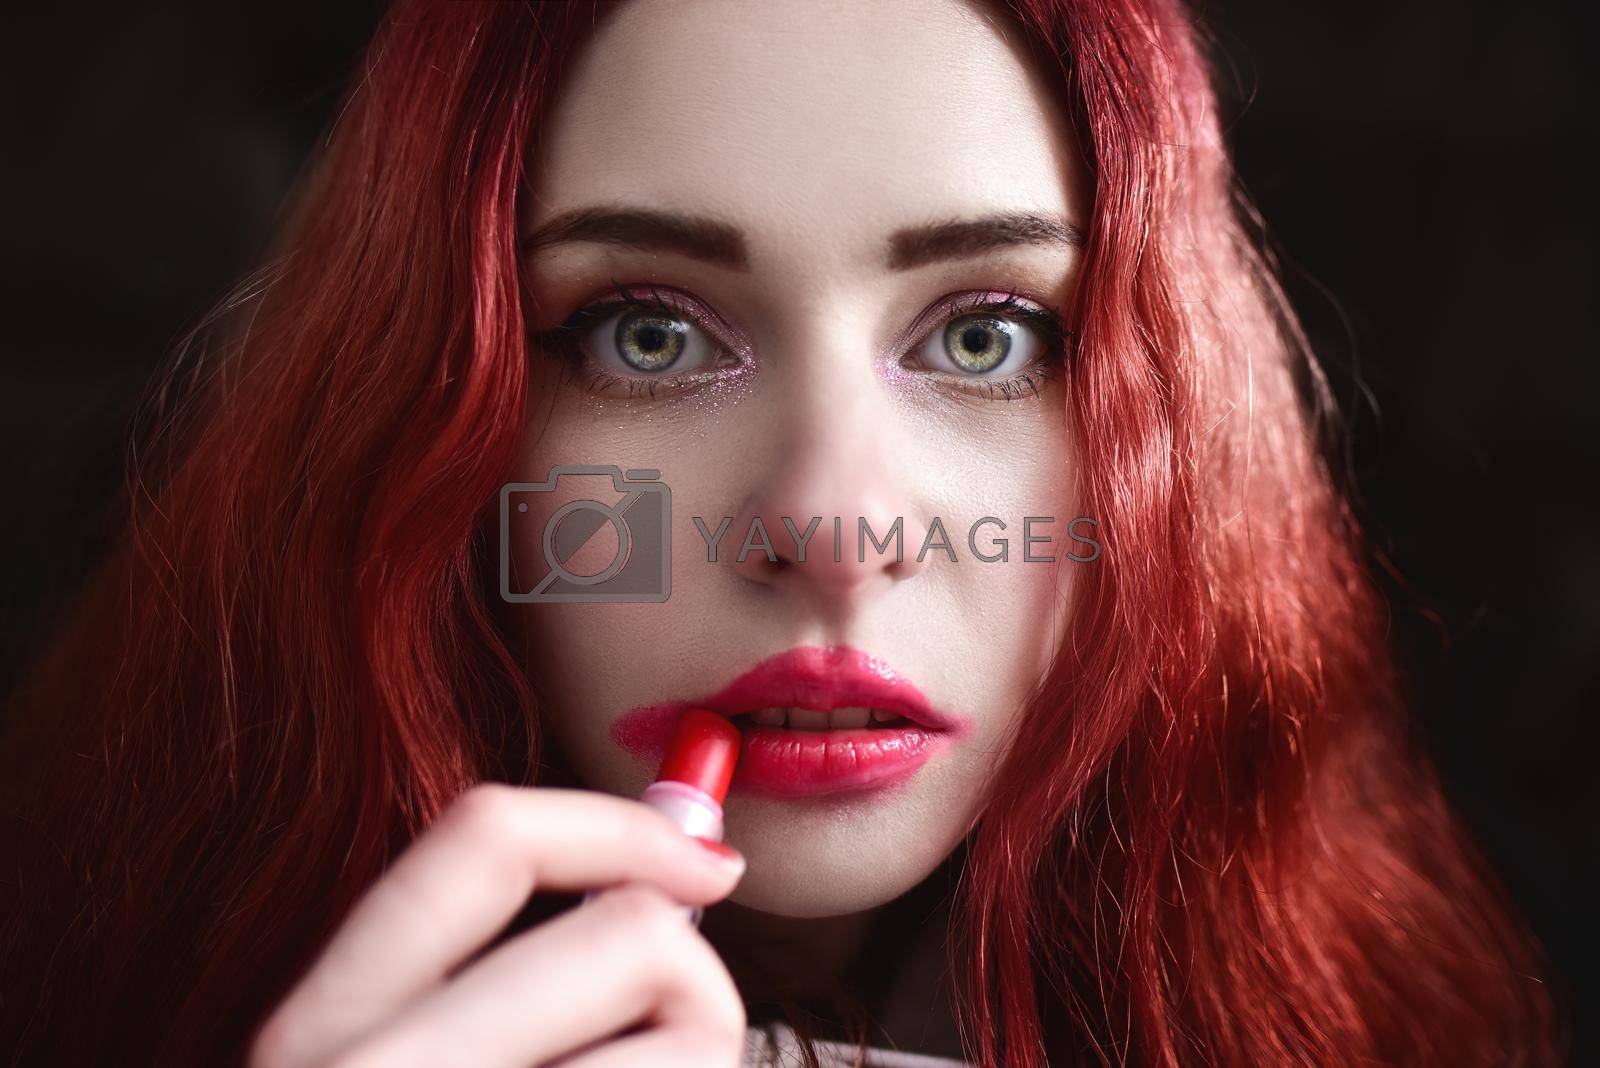 Royalty free image of Headshot of beautiful woman with nice make-up smearing red lipstick on her face, black background by Nickstock